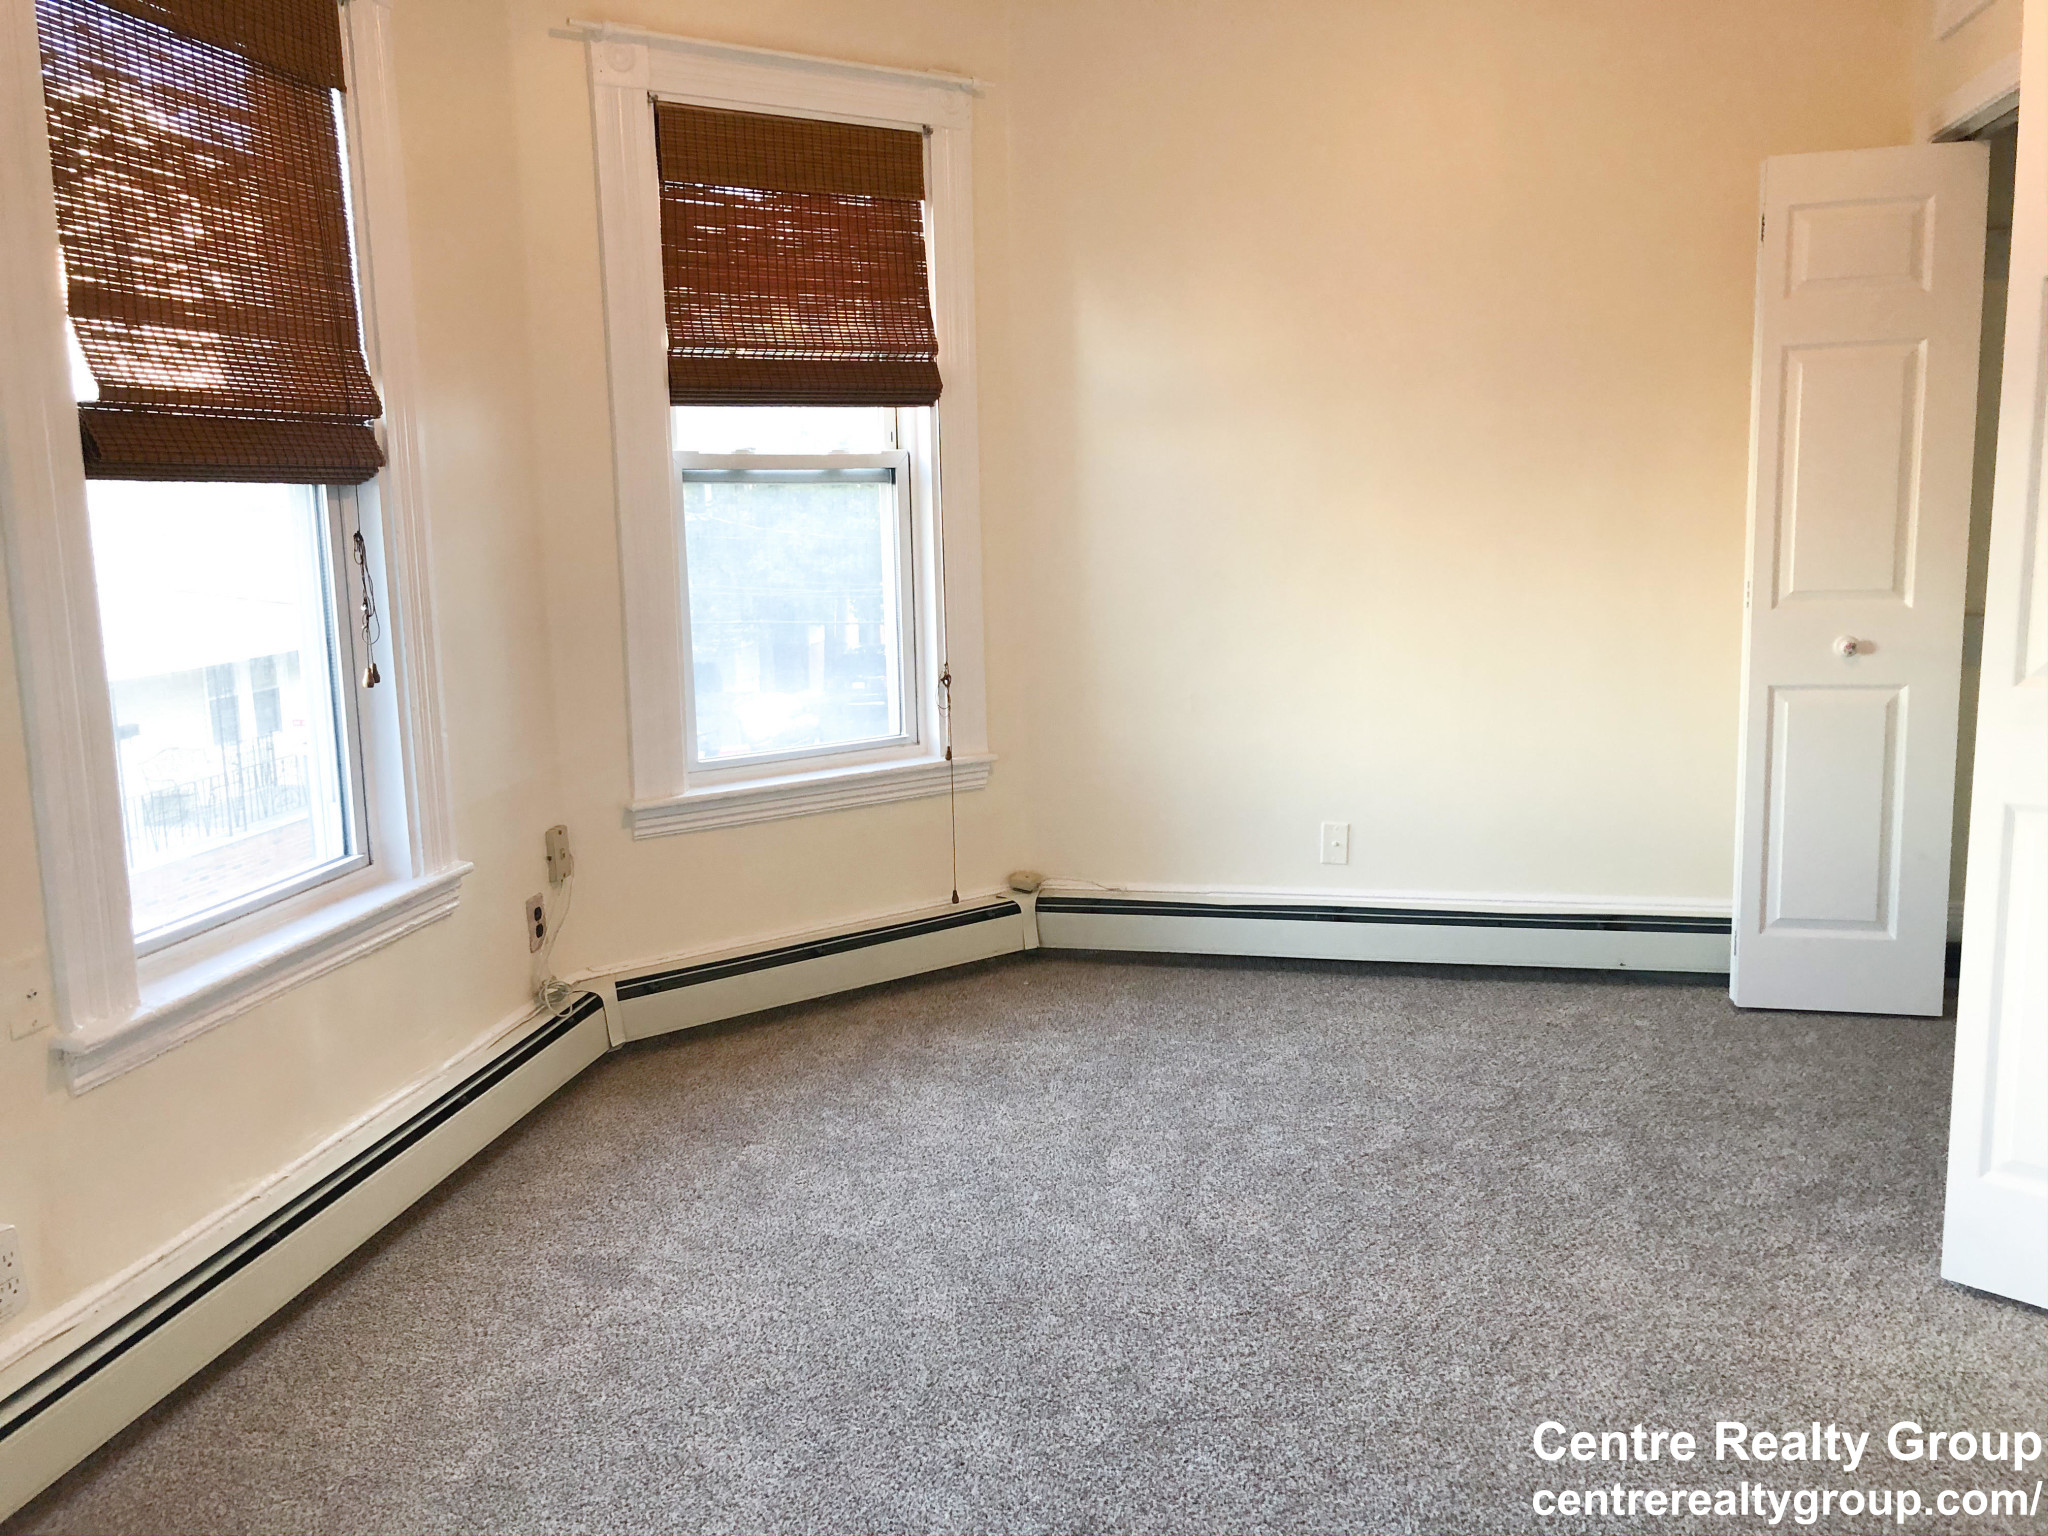 Photos of apartment on George St.,Somerville MA 02145